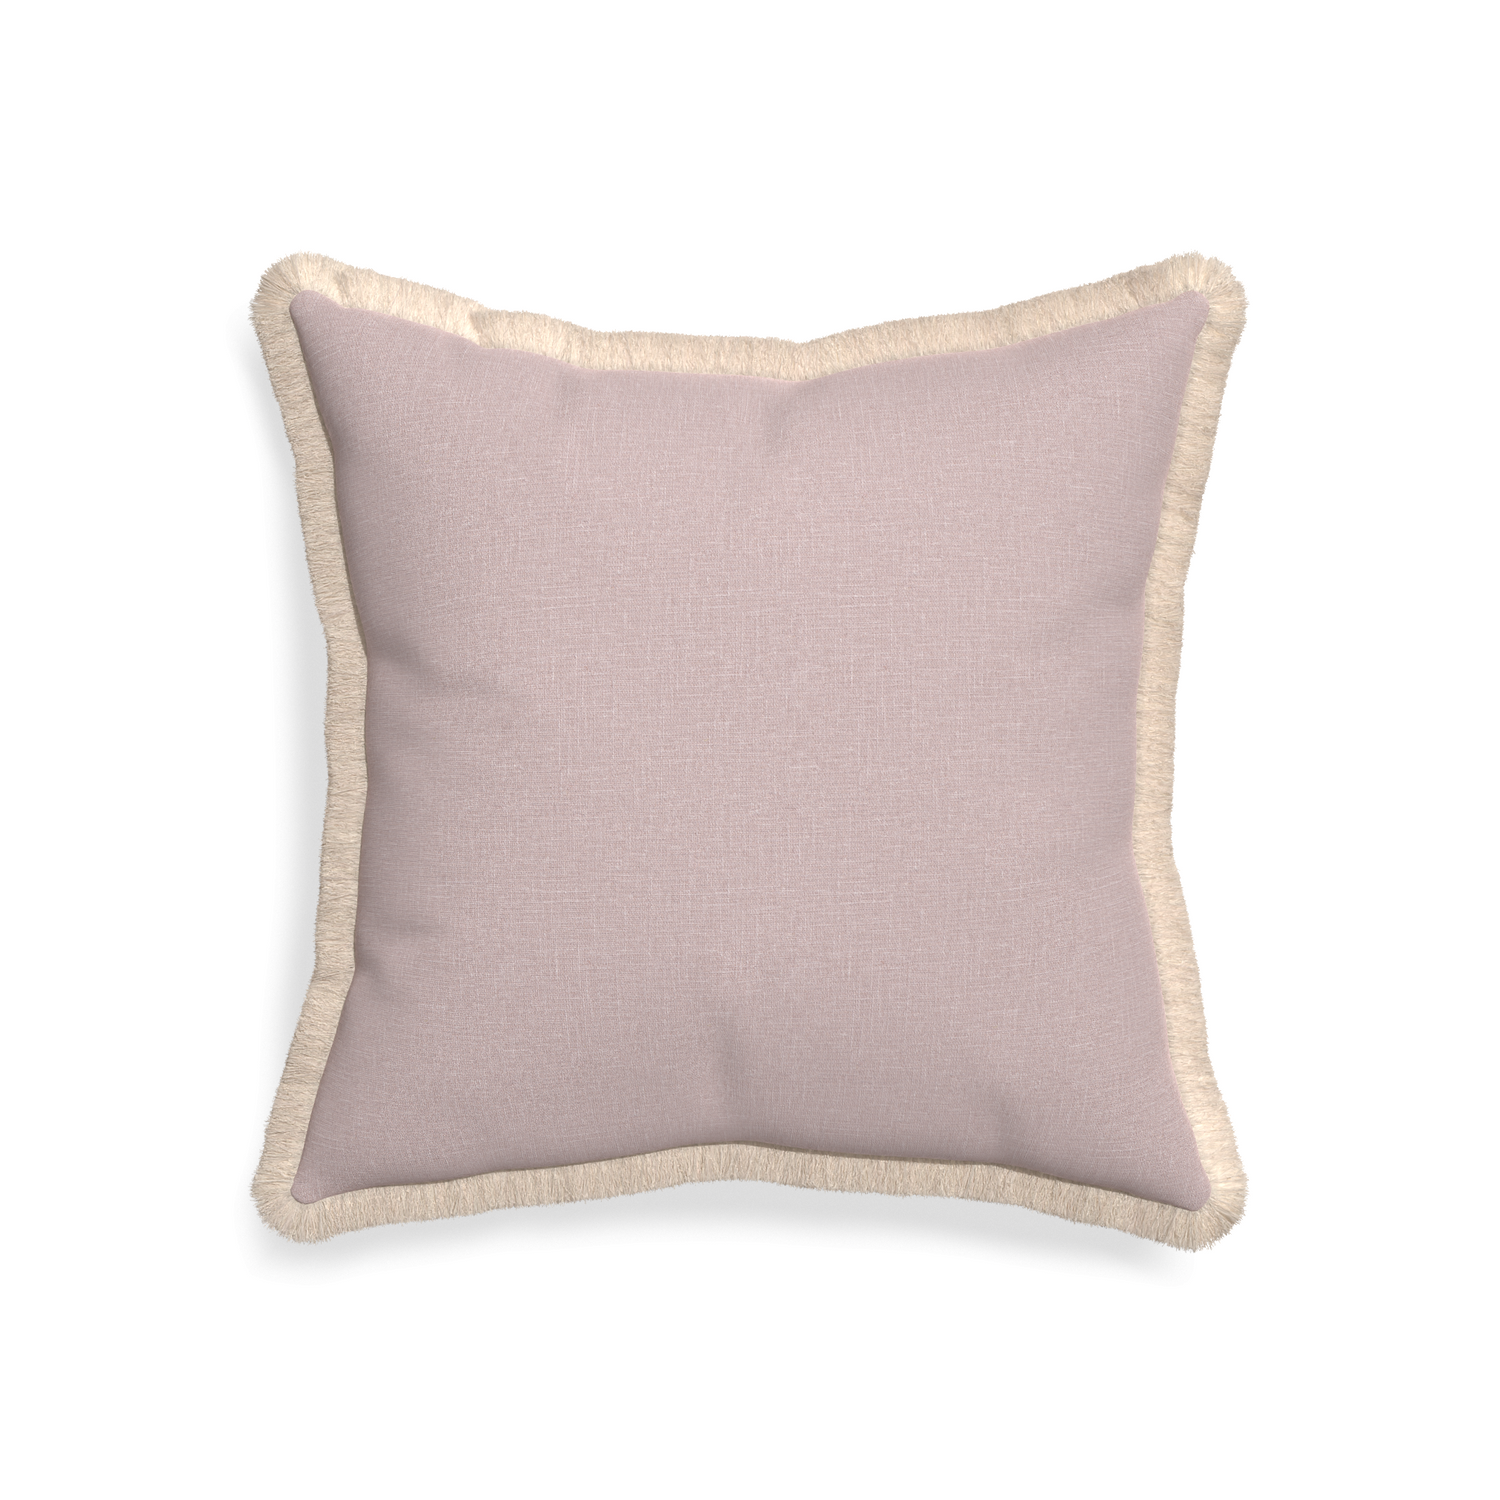 20-square orchid custom mauve pinkpillow with cream fringe on white background